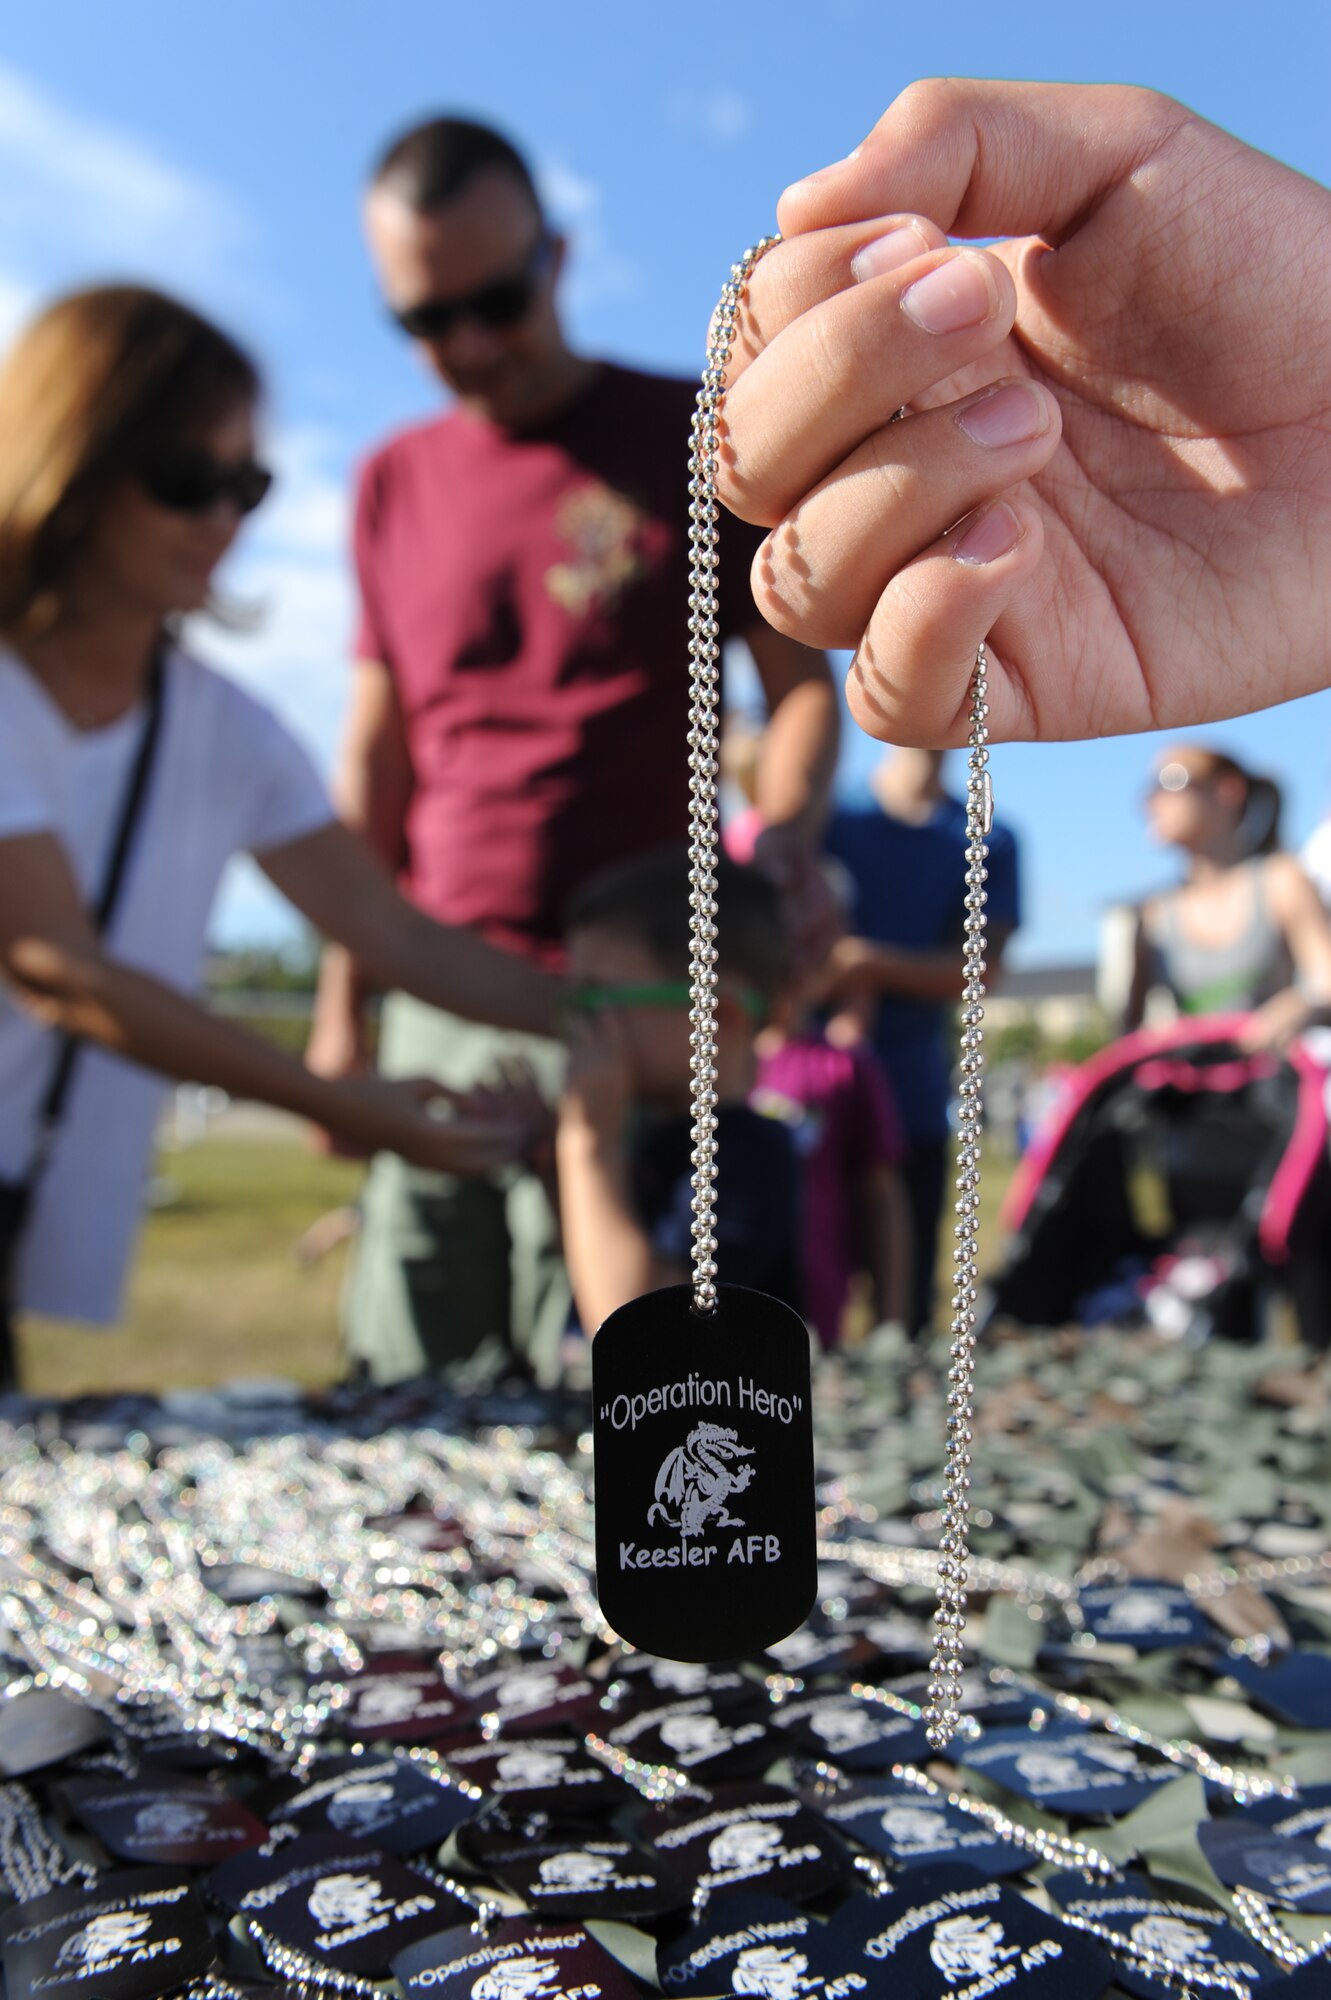 Ruben Cerda, Jr., son of Ruben Cerda, 81st Force Support Squadron airman and family services flight chief, holds a dog tag during Operation Hero Oct. 15, 2016, on Keesler Air Force Base, Miss. The event was designed to help children better understand what their parents do when they deploy. (U.S. Air Force photo by Kemberly Groue/Released)